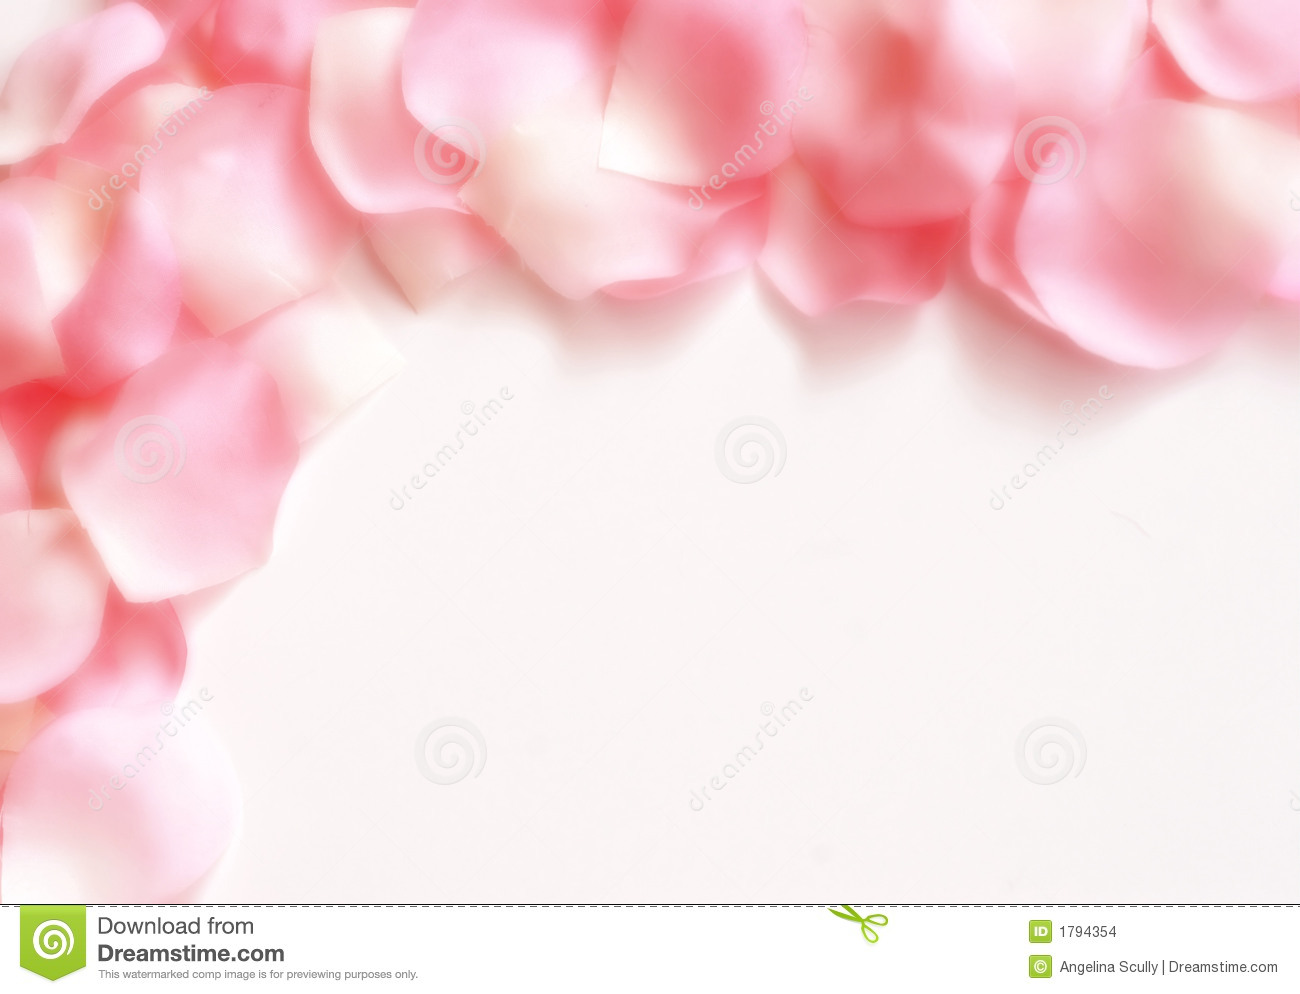 Pink And White Rose Petals Arranged In A Border Over A White